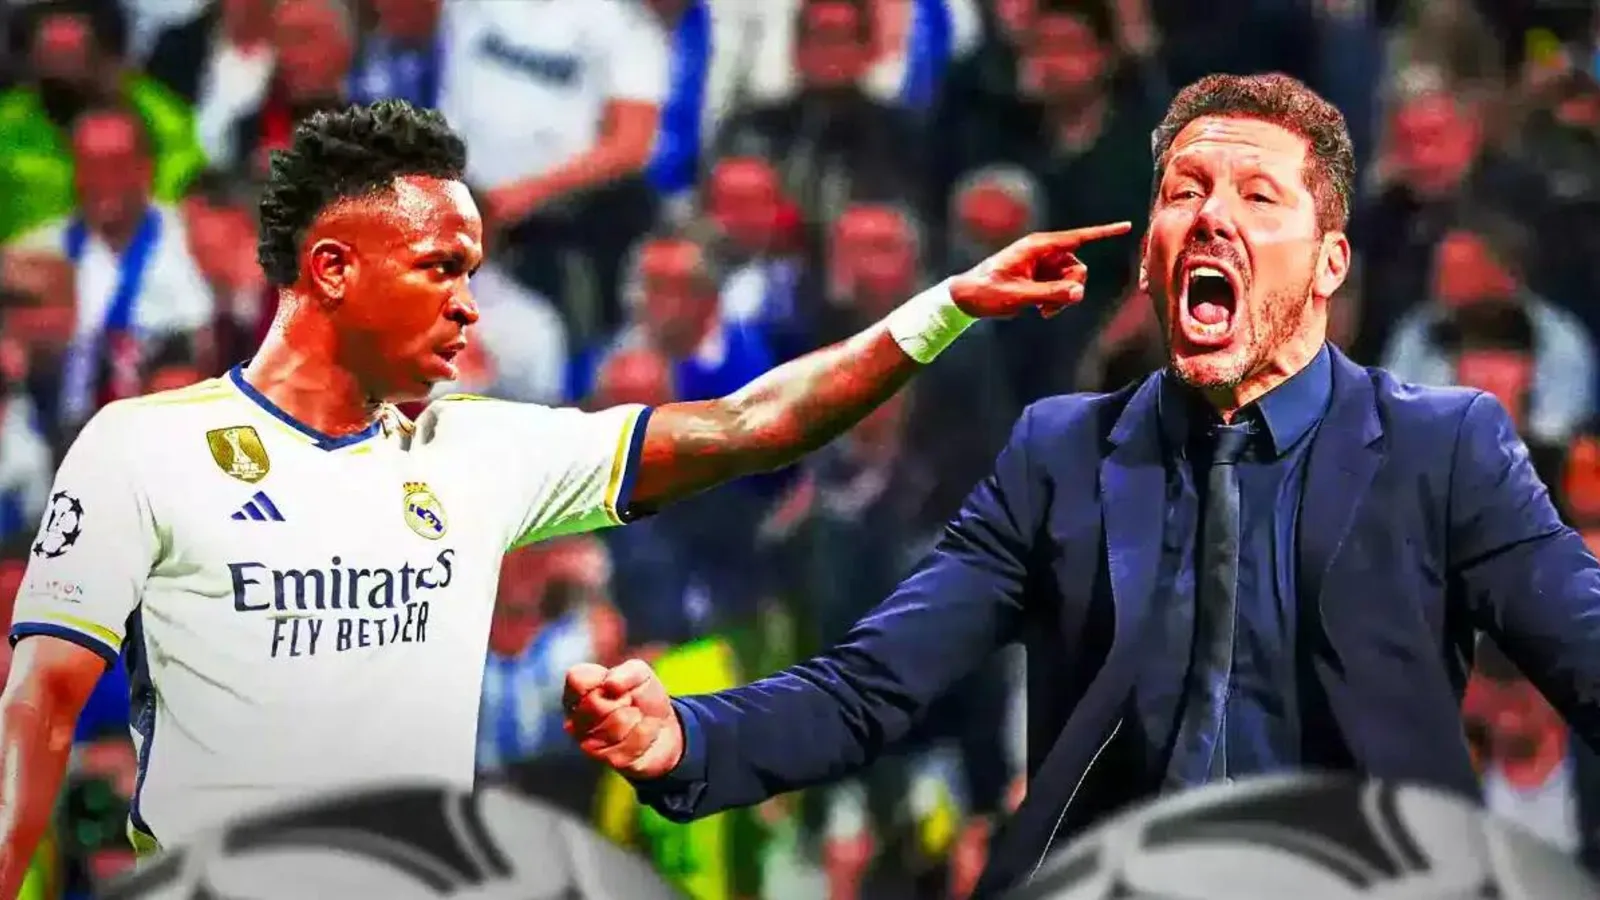 Vinicius and Diego Simeone seperated in a heated Madrid derby